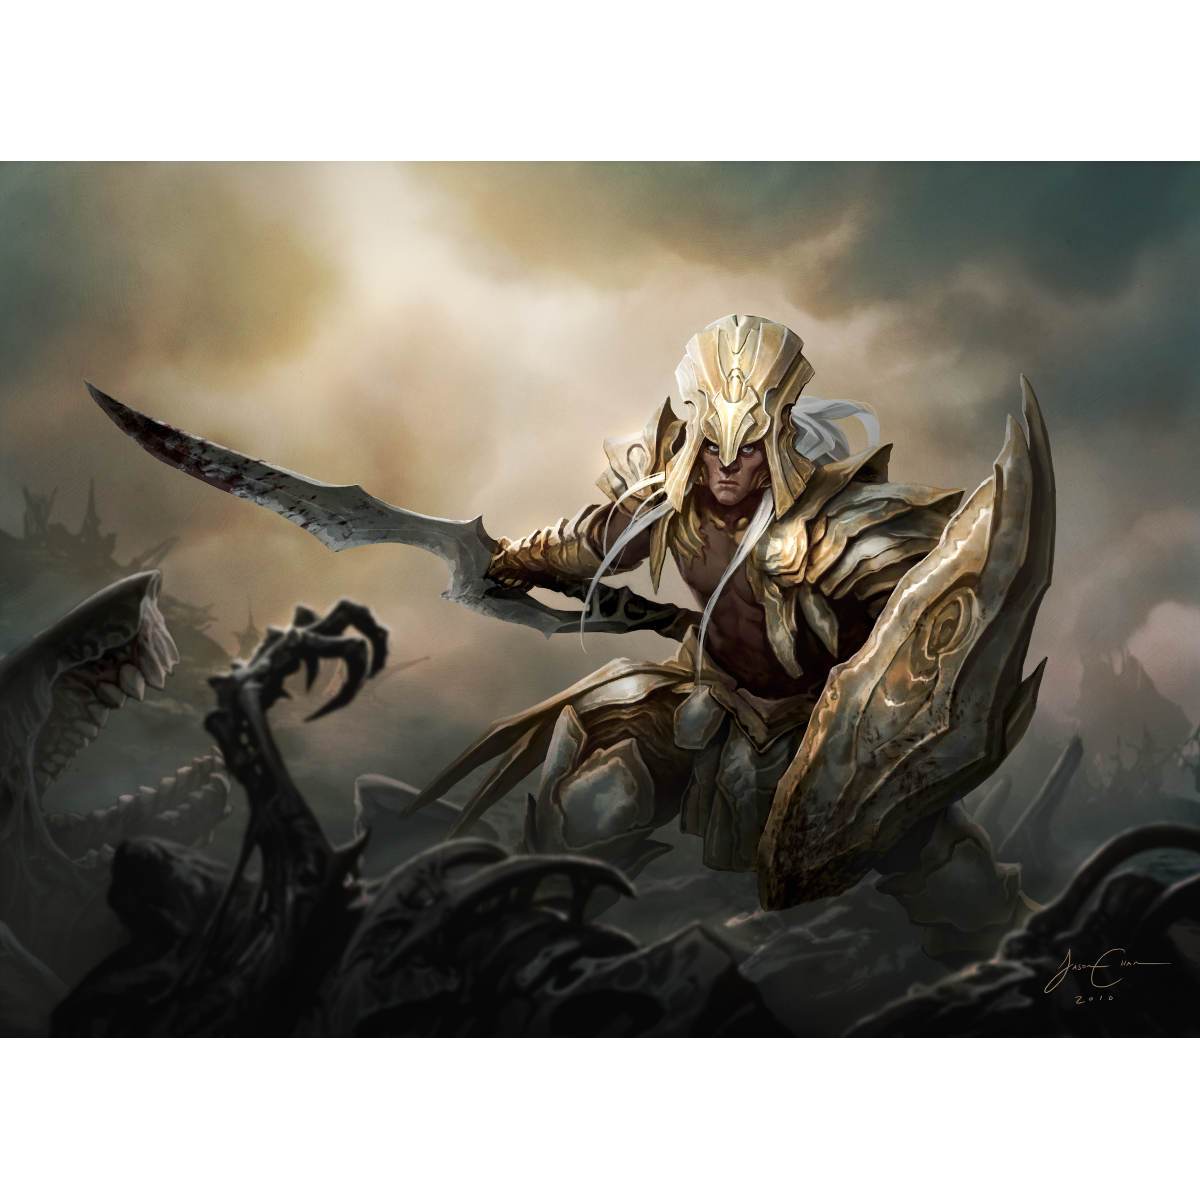 Puresteel Paladin Print - Print - Original Magic Art - Accessories for Magic the Gathering and other card games